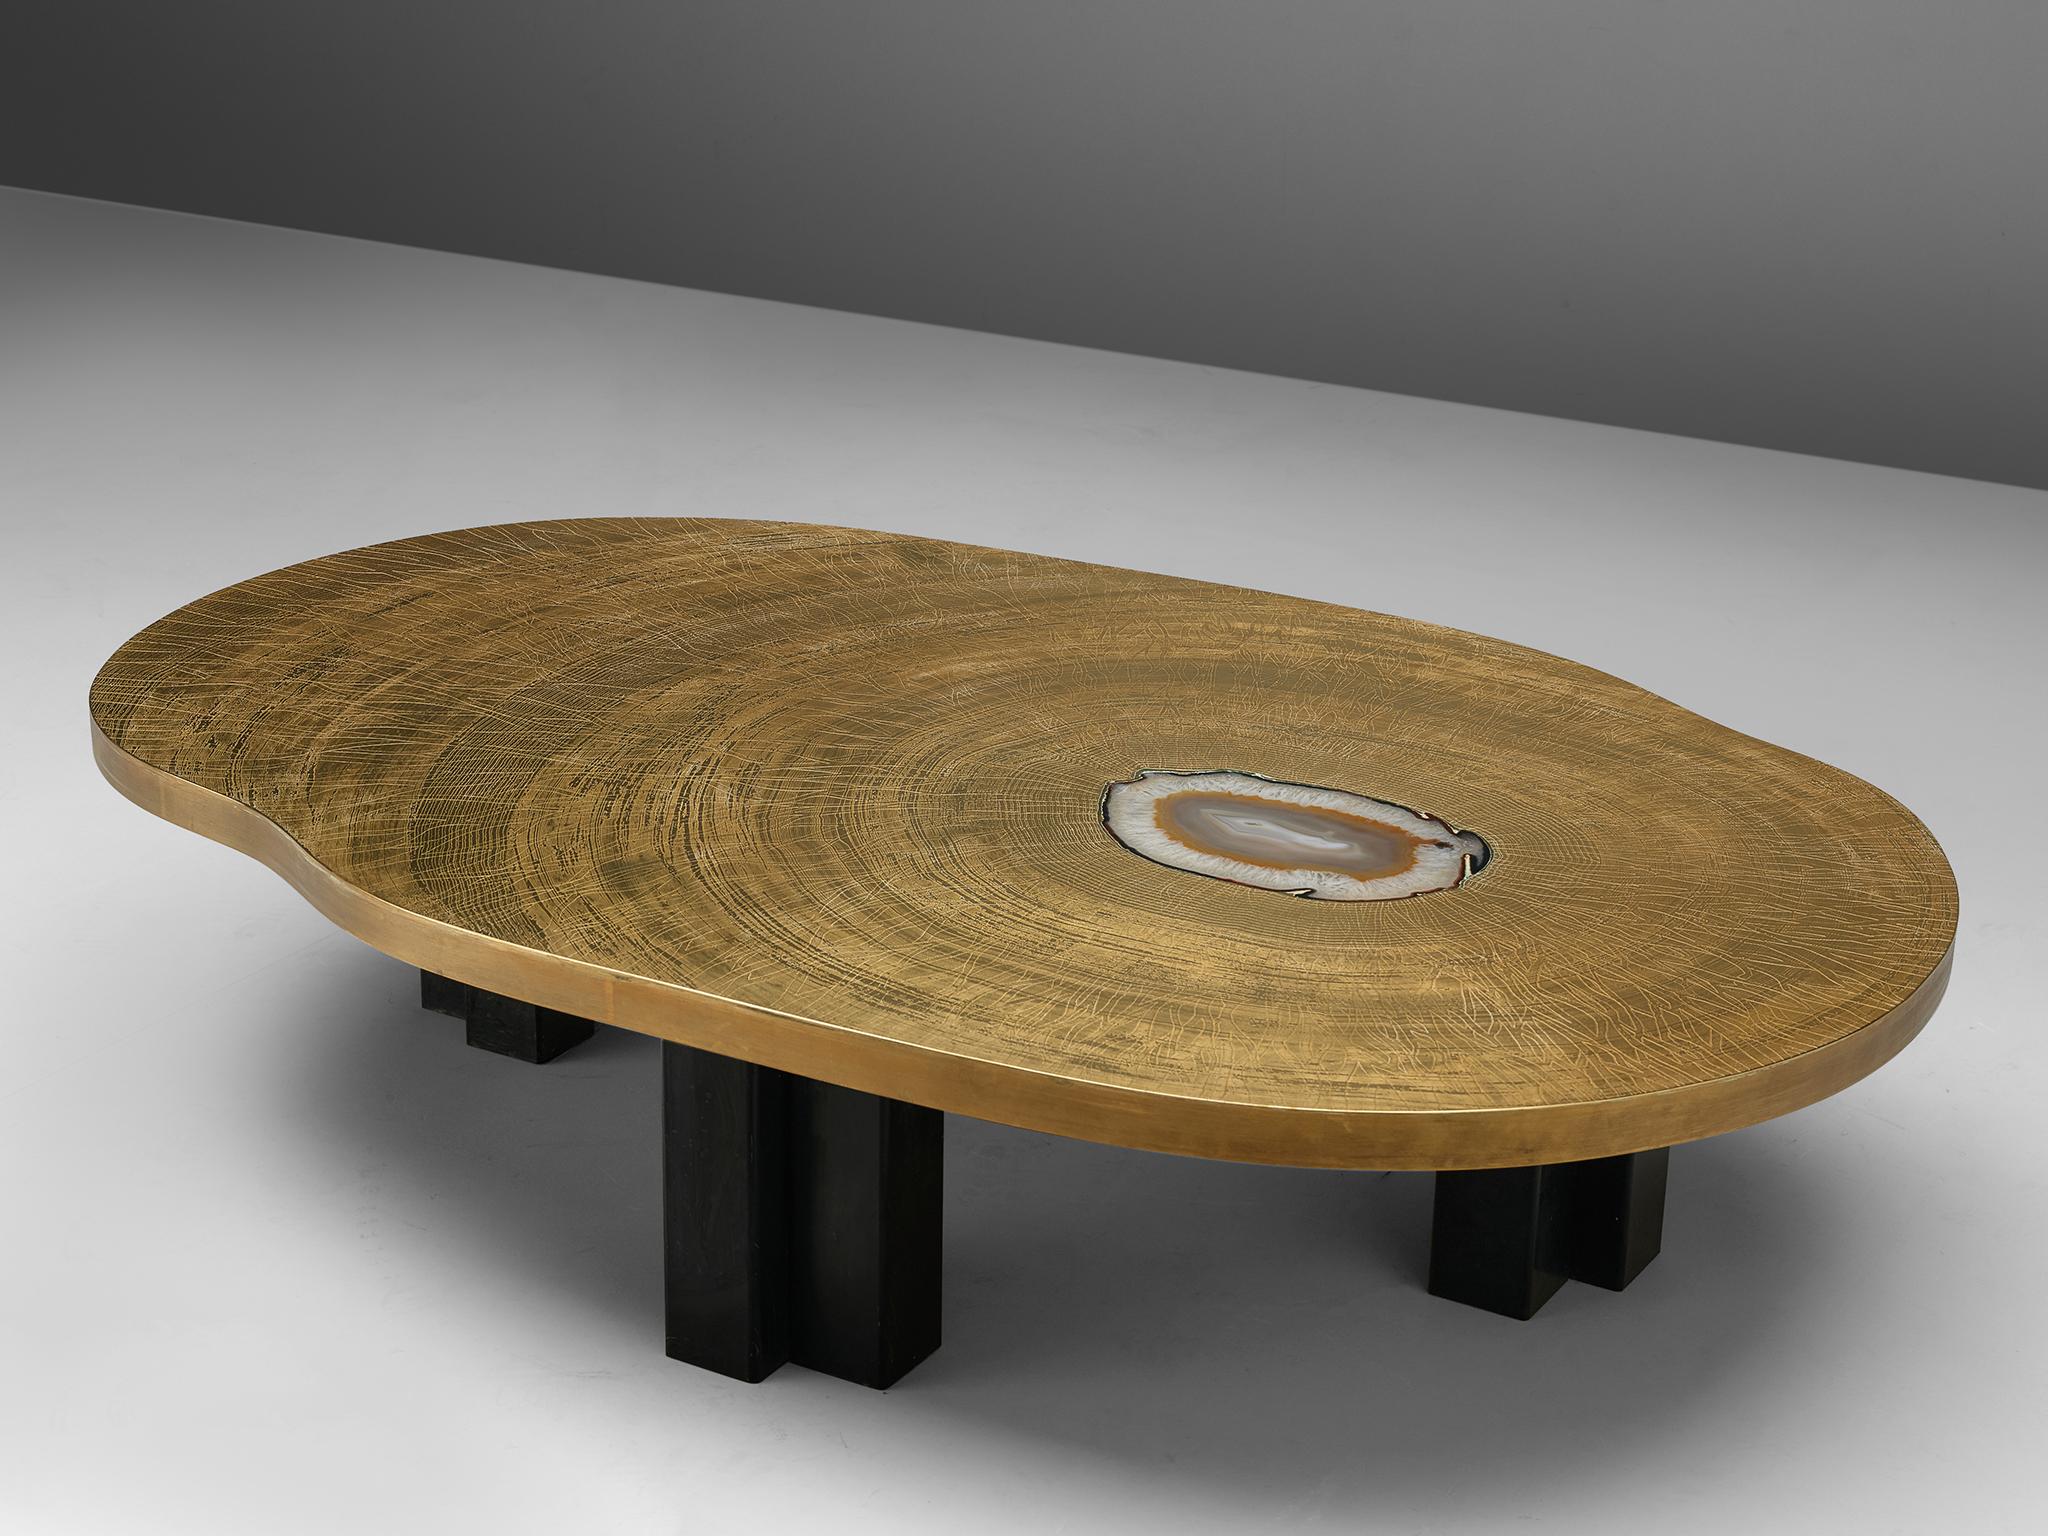 Christian Krekels, coffee table, brass and enameled steel, inlayed with agate, Belgium, circa 1980s.

This luxurious and refined coffee table features an etched brass tabletop and robust, dramatic black legs. The etched top shows two patterns that